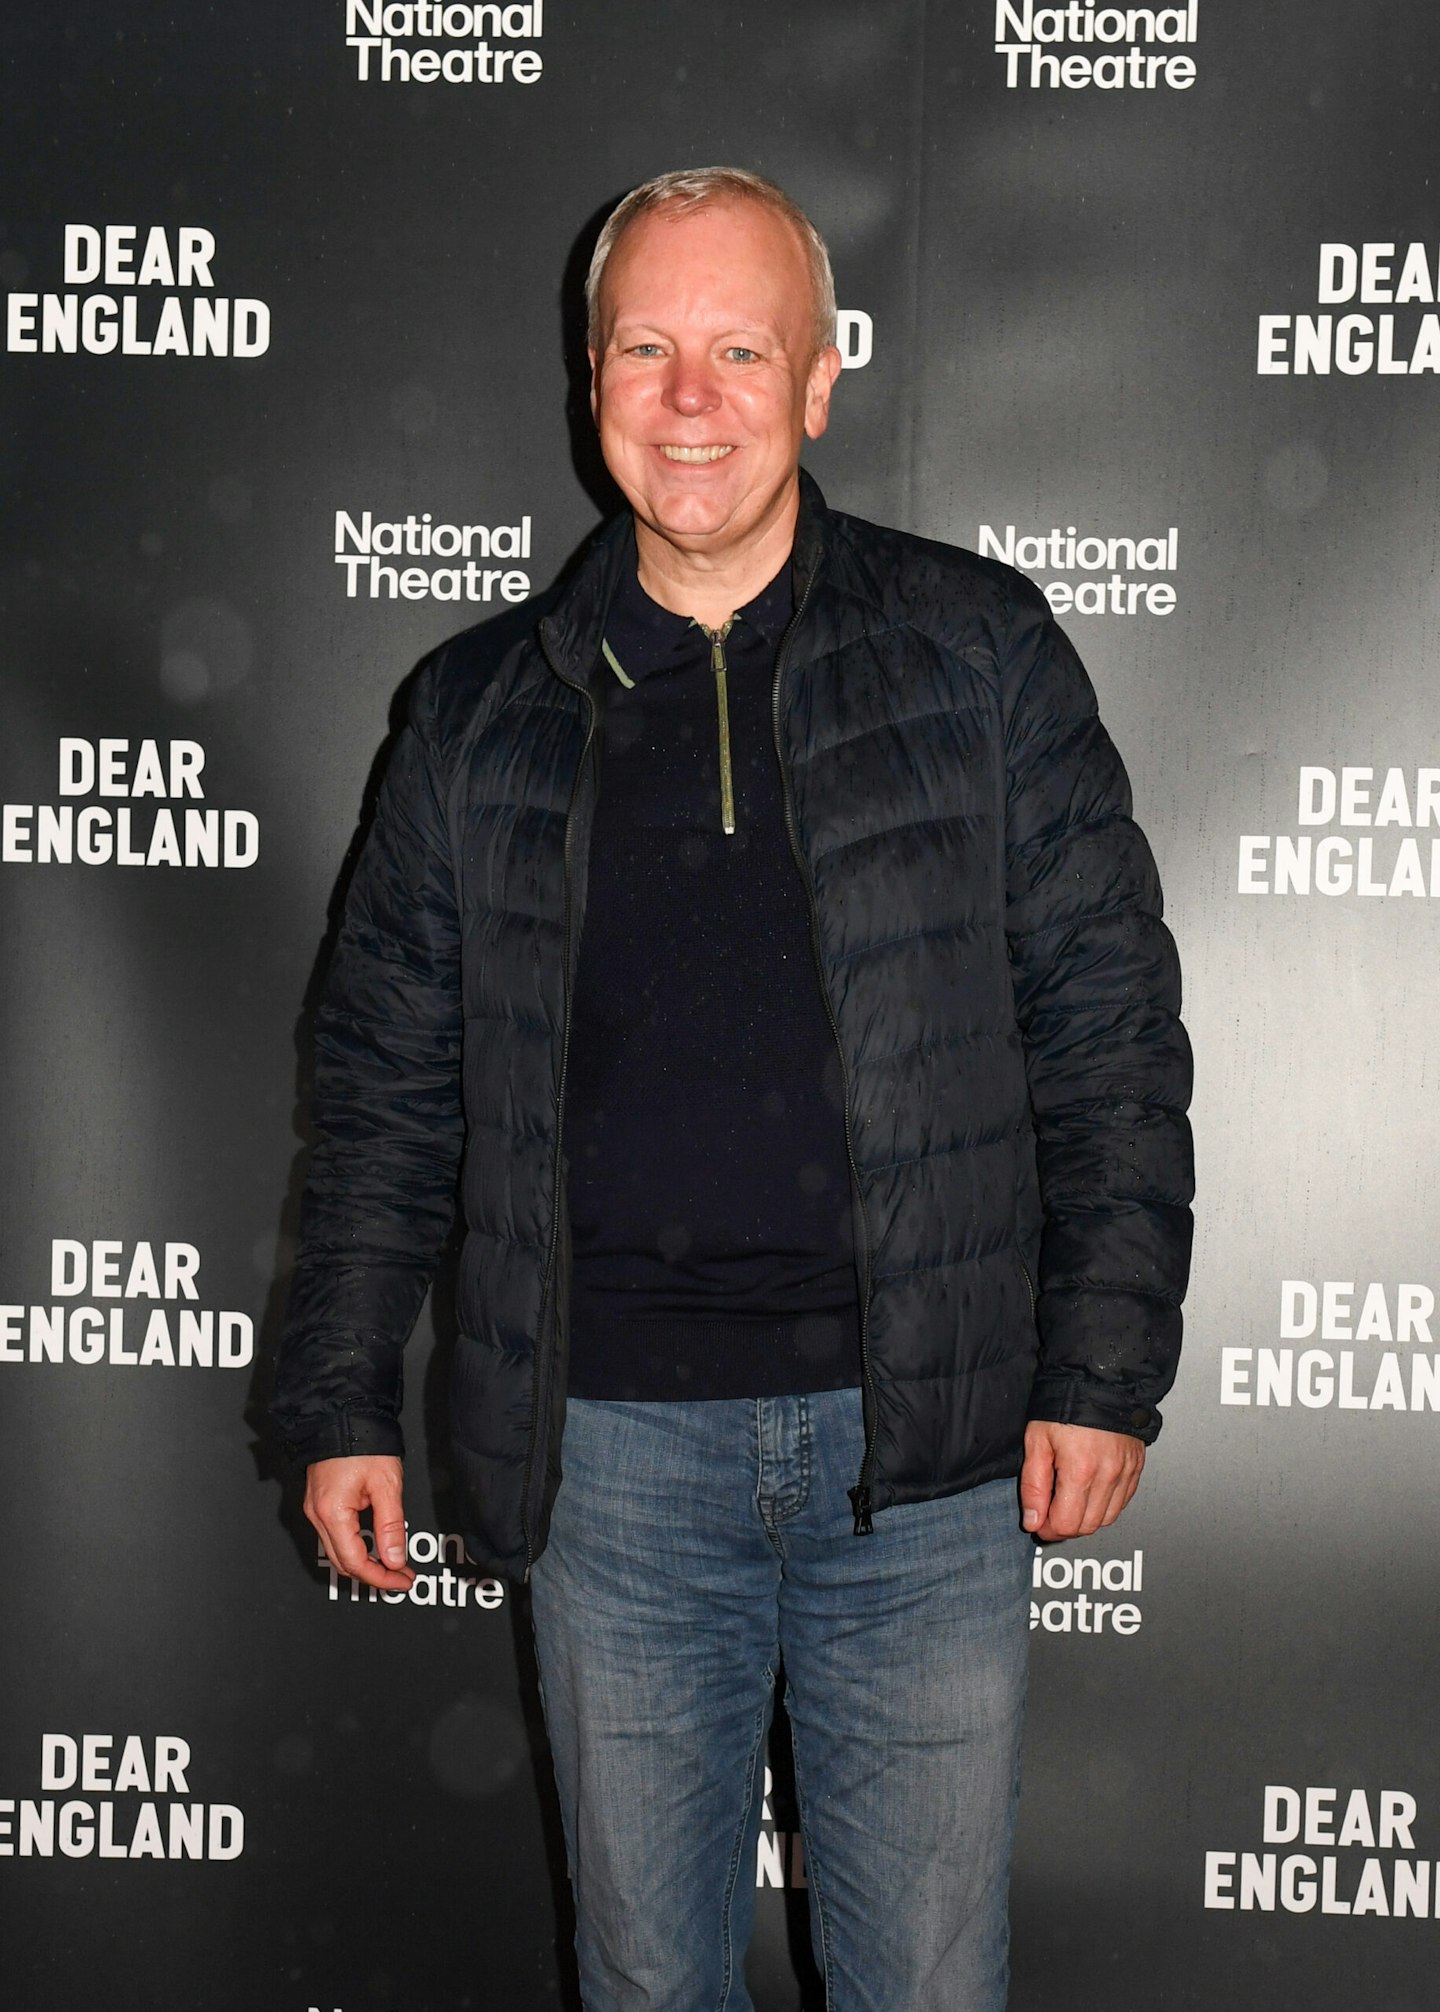 LONDON, ENGLAND - OCTOBER 19: Steve Pemberton attends the opening night of "Dear England" at Prince Edward Theatre on October 19, 2023 in London, England. (Photo by Nicky J Sims/Getty Images)